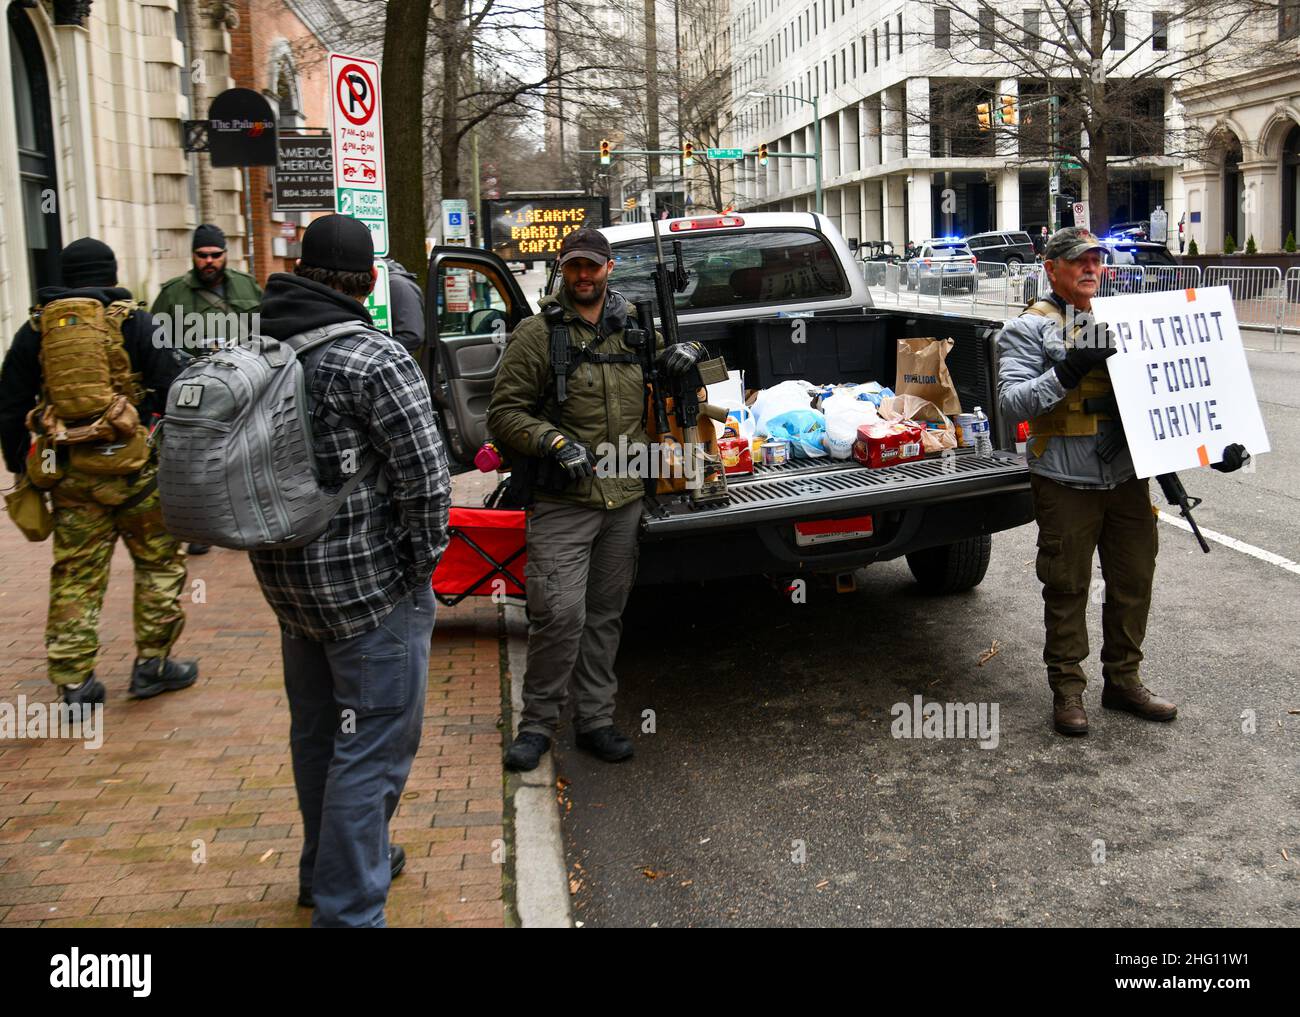 Richmond, USA. 17th Jan, 2022. Armed protesters from multiple groups advocating for gun rights demonstrate in the streets surrounding the Virginia State Capitol and hold a food drive on Martin Luther King Jr. Day, January 17, 2022 in Richmond, Virginia. Police forced participants to leave restricted areas bordering government land but no arrests were made. (Photo by Matthew Rodier/Sipa USA) Credit: Sipa USA/Alamy Live News Stock Photo